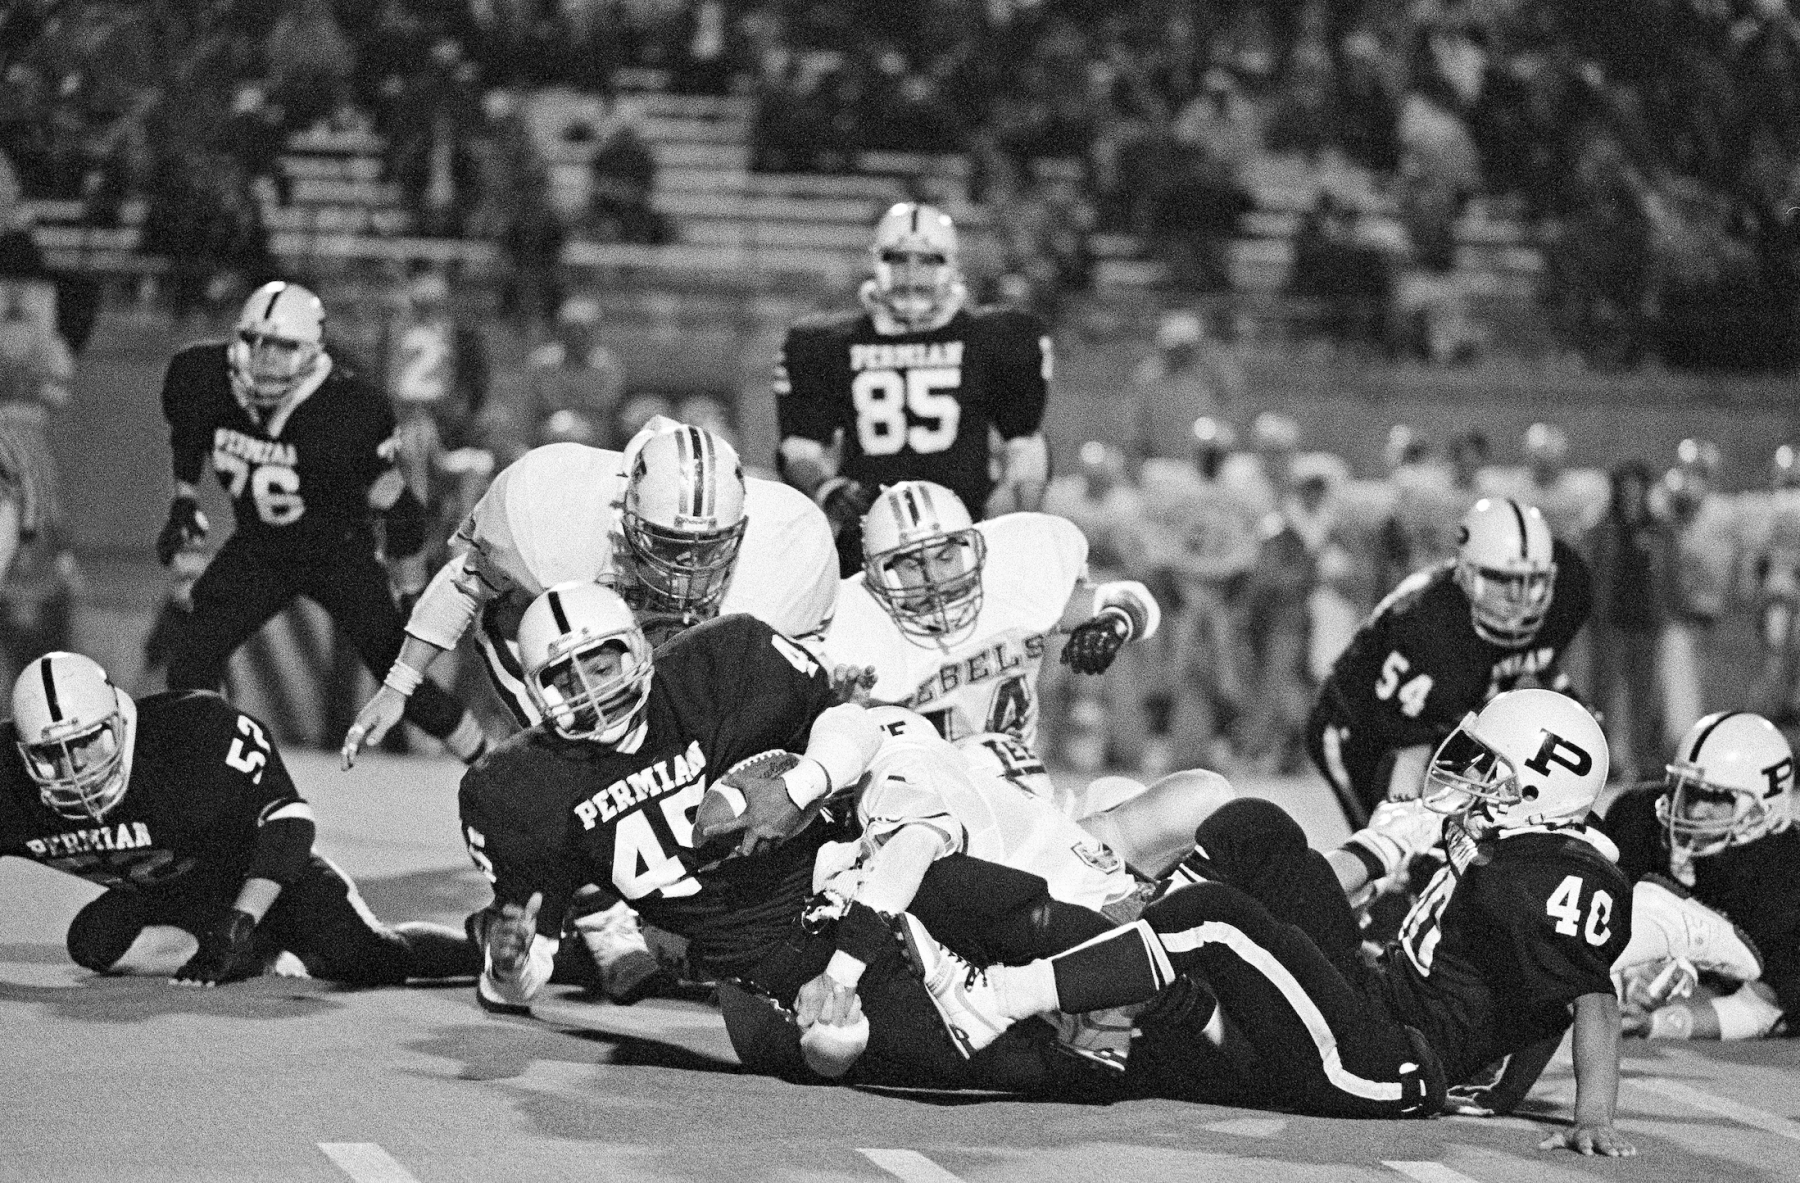 Running back Chris Comer rushes for a first down against the arch-rival Midland Lee Rebels.<br><br>“Comer really became quite the star for them that year,” Clark says. “The next season, he did an amazing job and Permian were state champions. He was a great kid and almost had 4,000 yards rushing in his career. Comer is Permian’s third all-time leading rusher with 3,724 yards in two seasons as starter. That's pretty amazing. He was so good. The really sad thing is, Chris died when he was 46 years old. He went in for an operation and didn't come out. It was a very sad turn of events.”